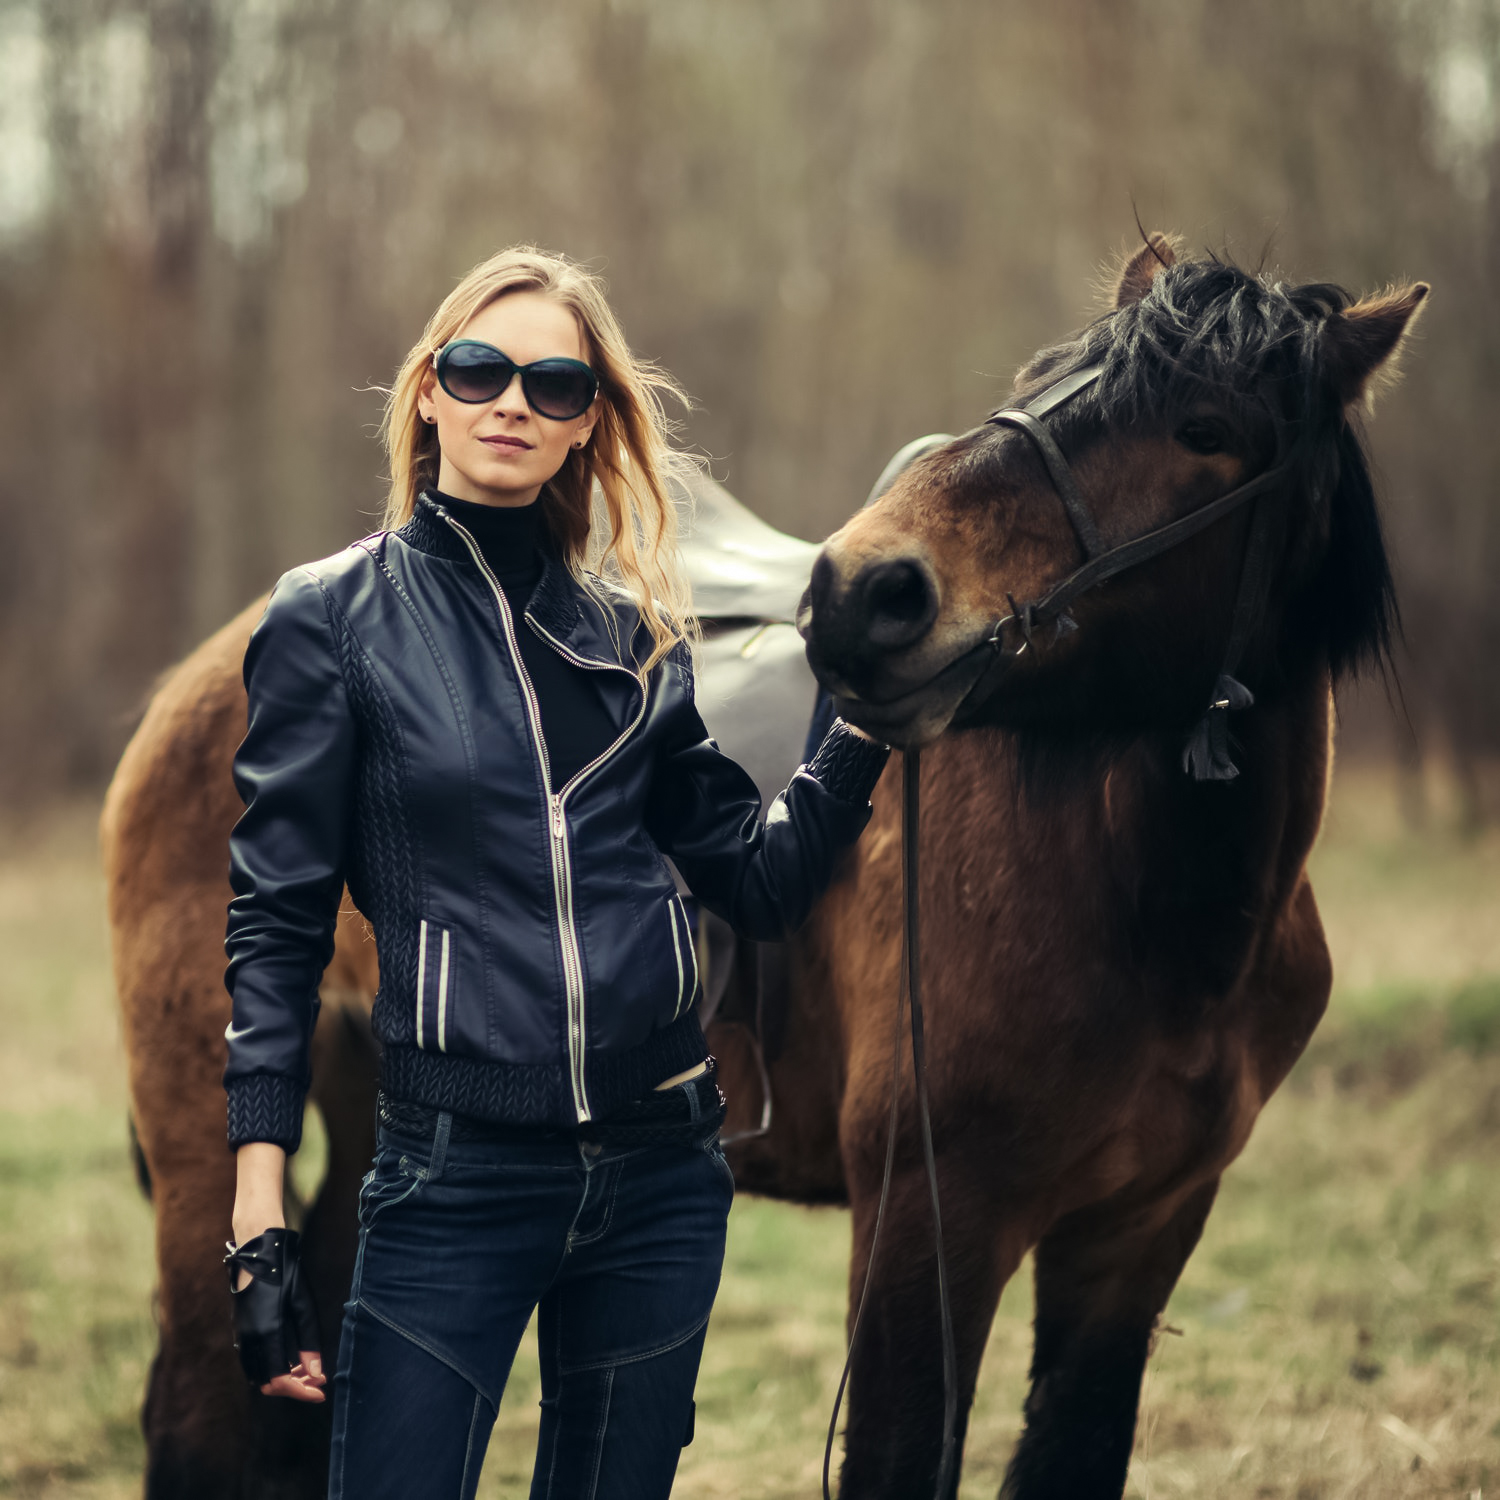 People 1500x1500 Joan Le Jan women blonde long hair sunglasses smiling leather jacket gloves black clothing animals horse outdoors women with horse